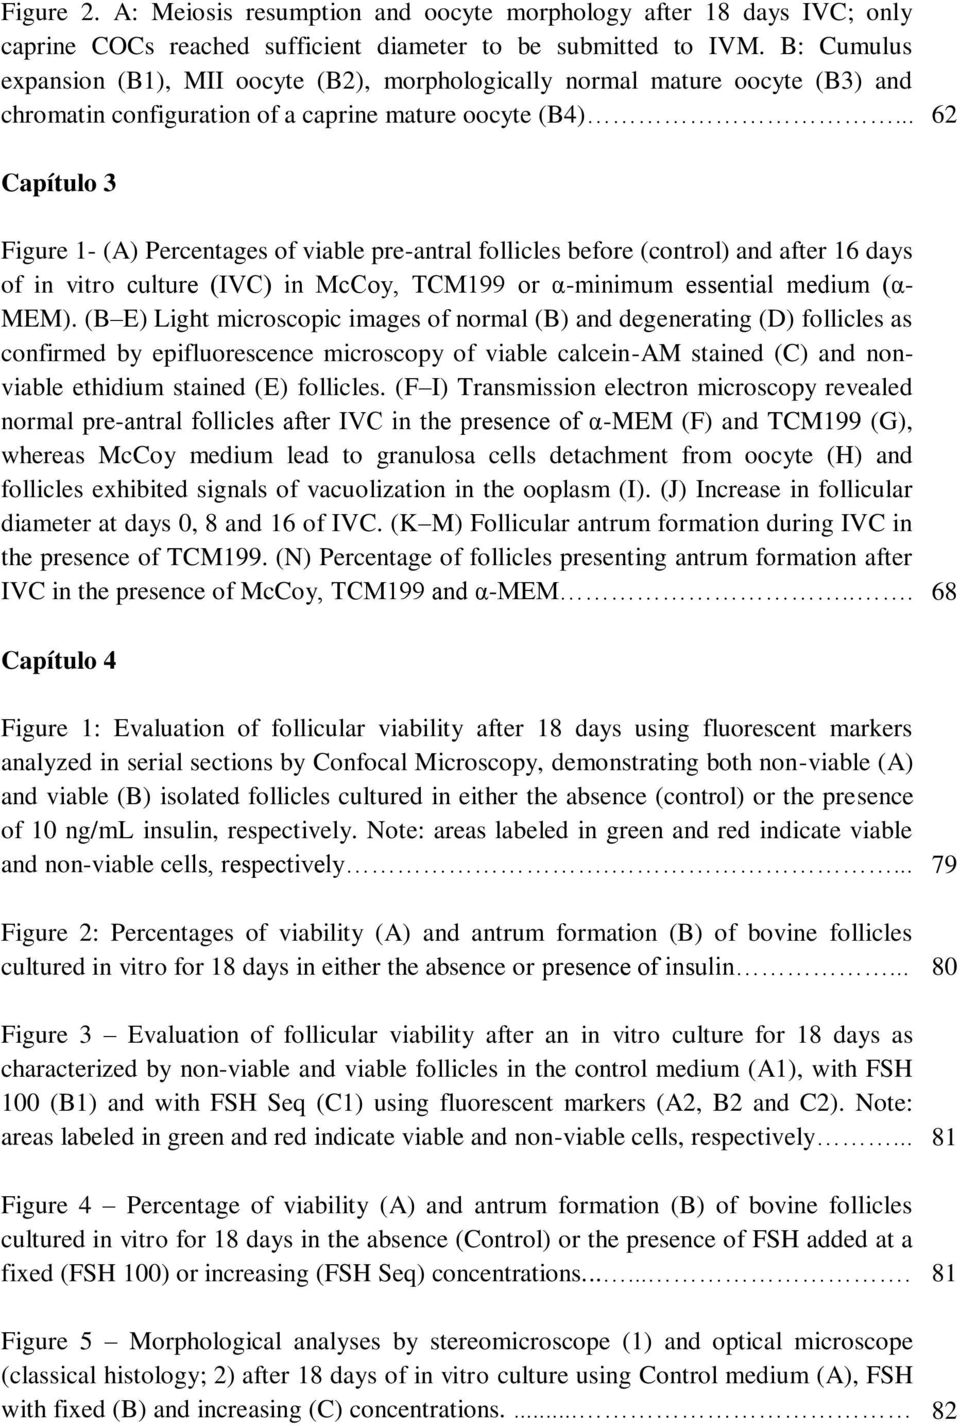 .. 62 Capítulo 3 Figure 1- (A) Percentages of viable pre-antral follicles before (control) and after 16 days of in vitro culture (IVC) in McCoy, TCM199 or α-minimum essential medium (α- MEM).